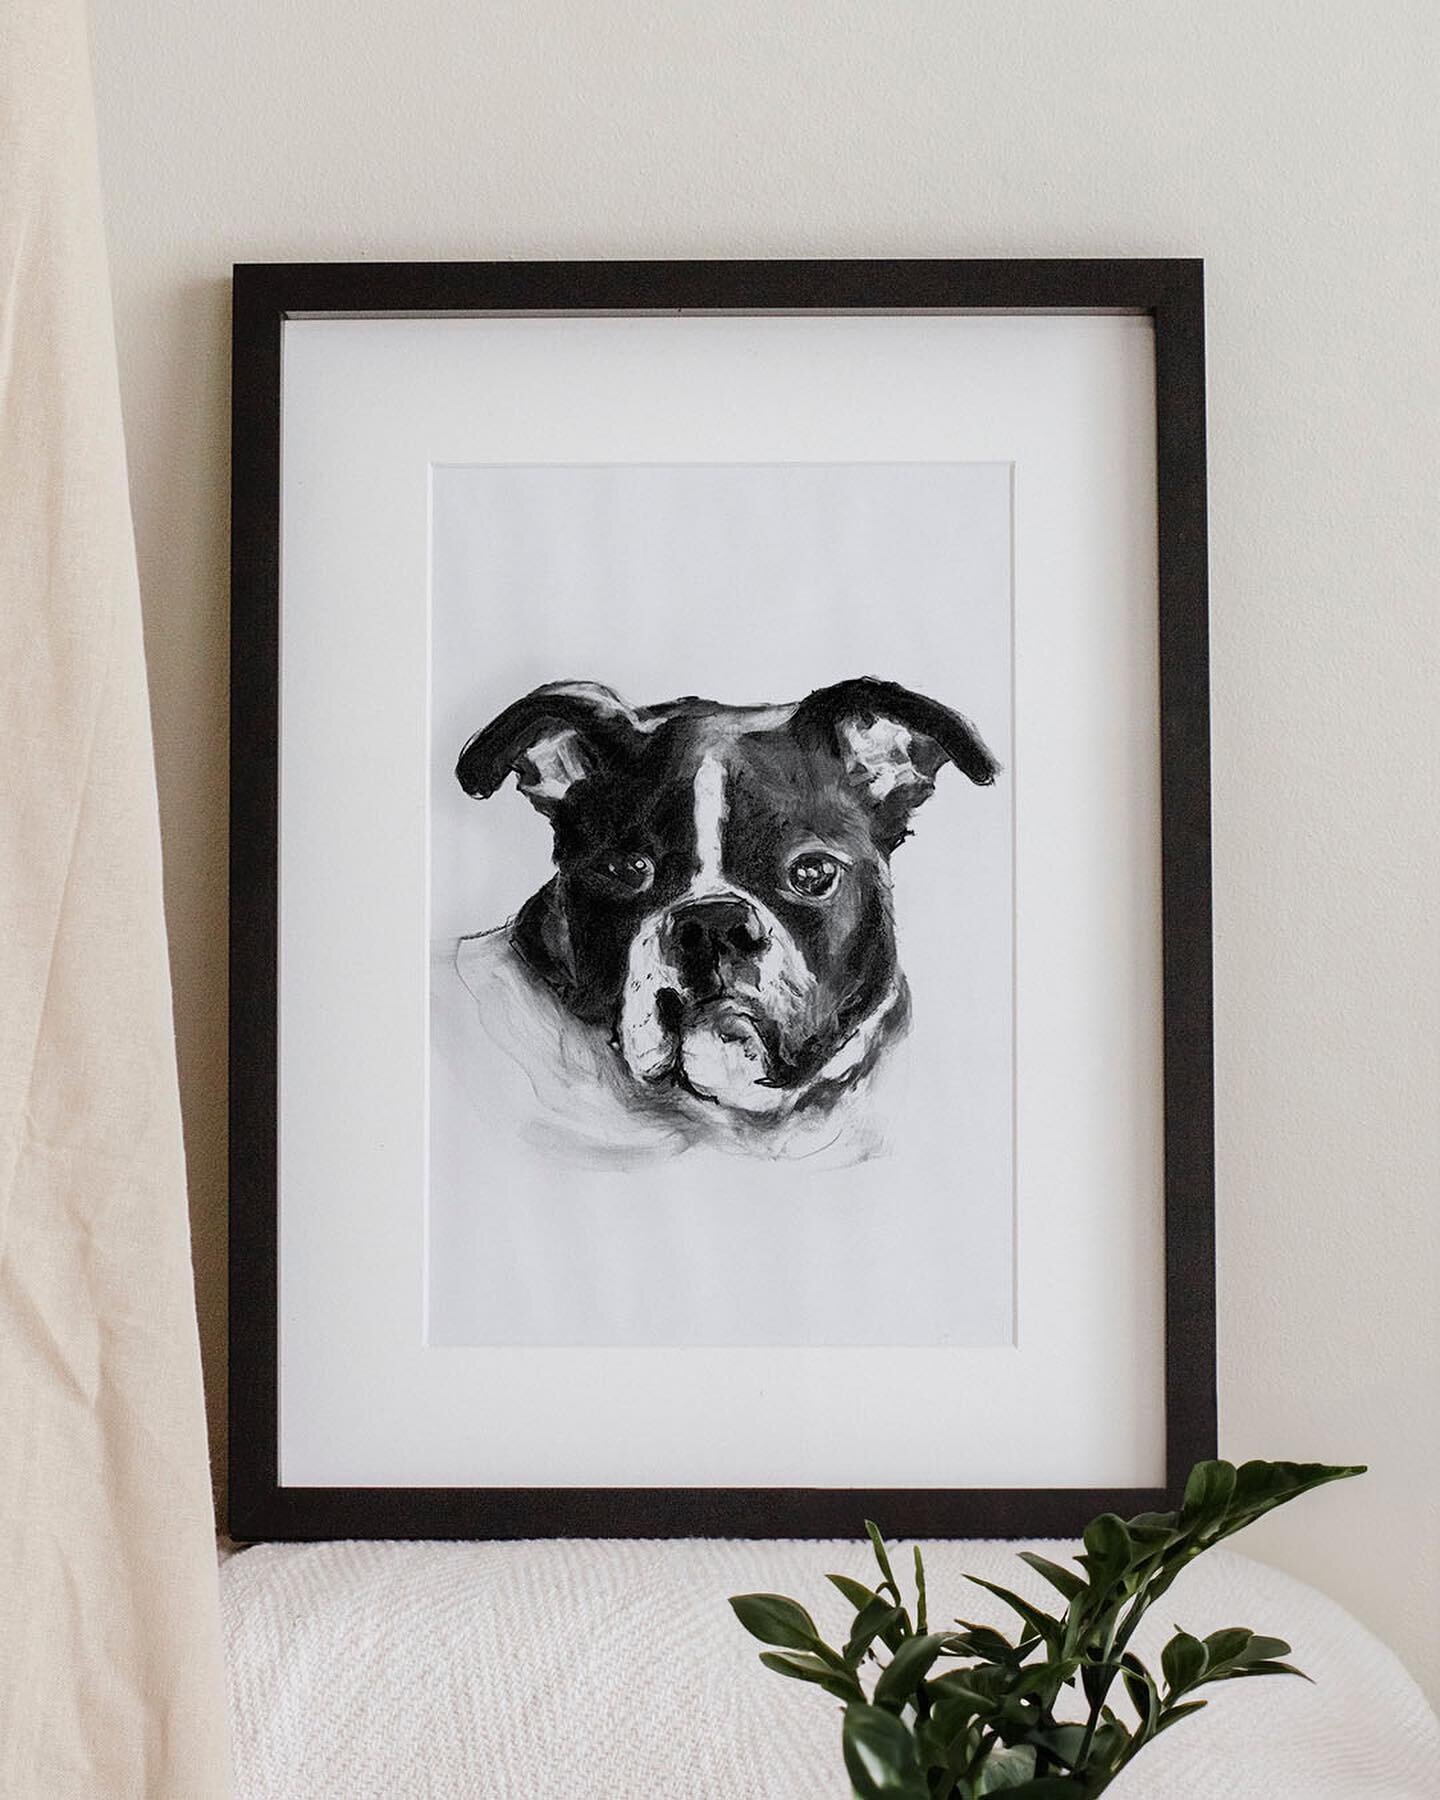 Capturing your best friend&rsquo;s personality through charcoal strokes. 

#petart 
#petportraits 
#contemporarypetart 
#drawing #apartmentliving